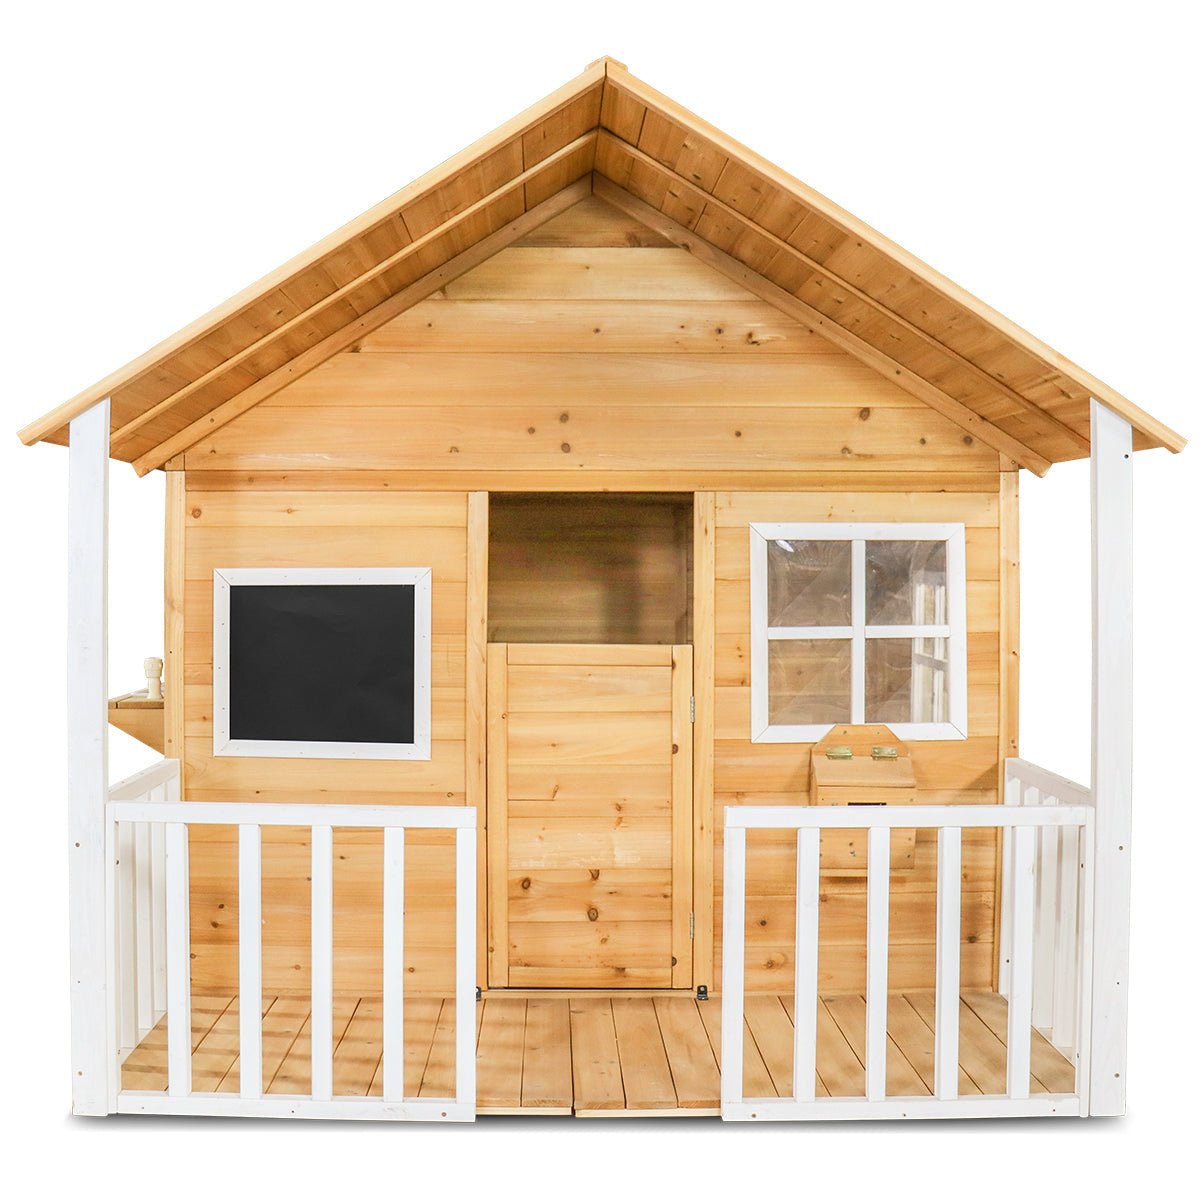 Wooden Cubby House - Lifespan Kids Camira Cubby